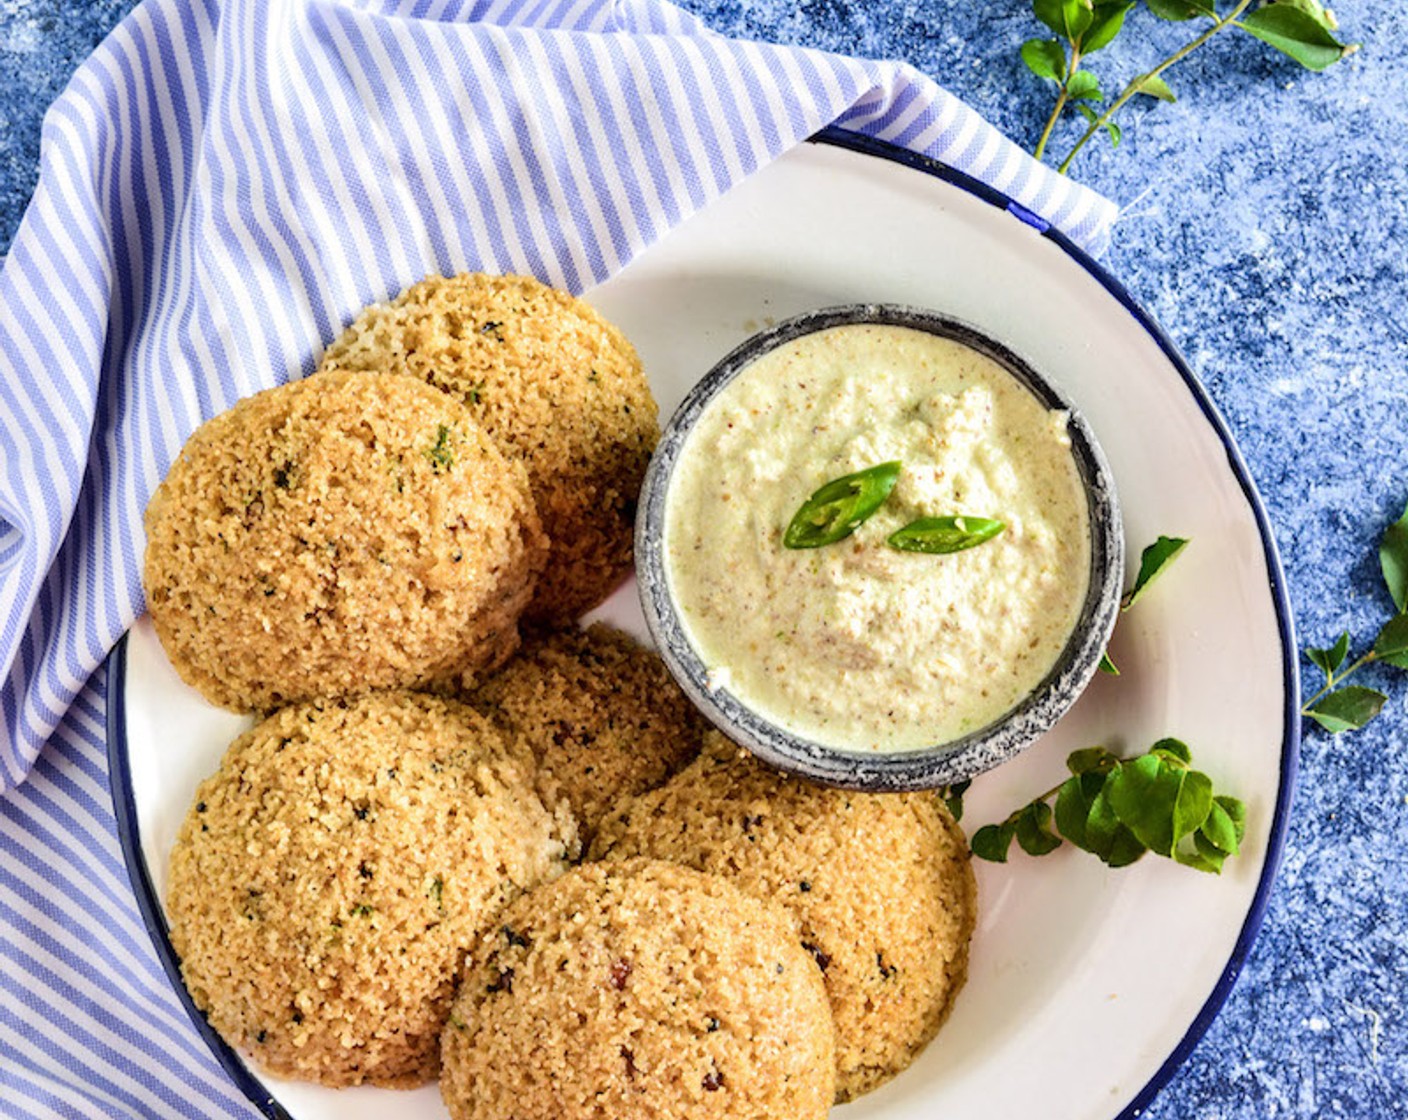 step 11 Now carefully take out the Idlis by running a knife on sides. Plate the hot and fluffy Rawa Idlis in a plate and serve hot with green chili and coconut chutney.